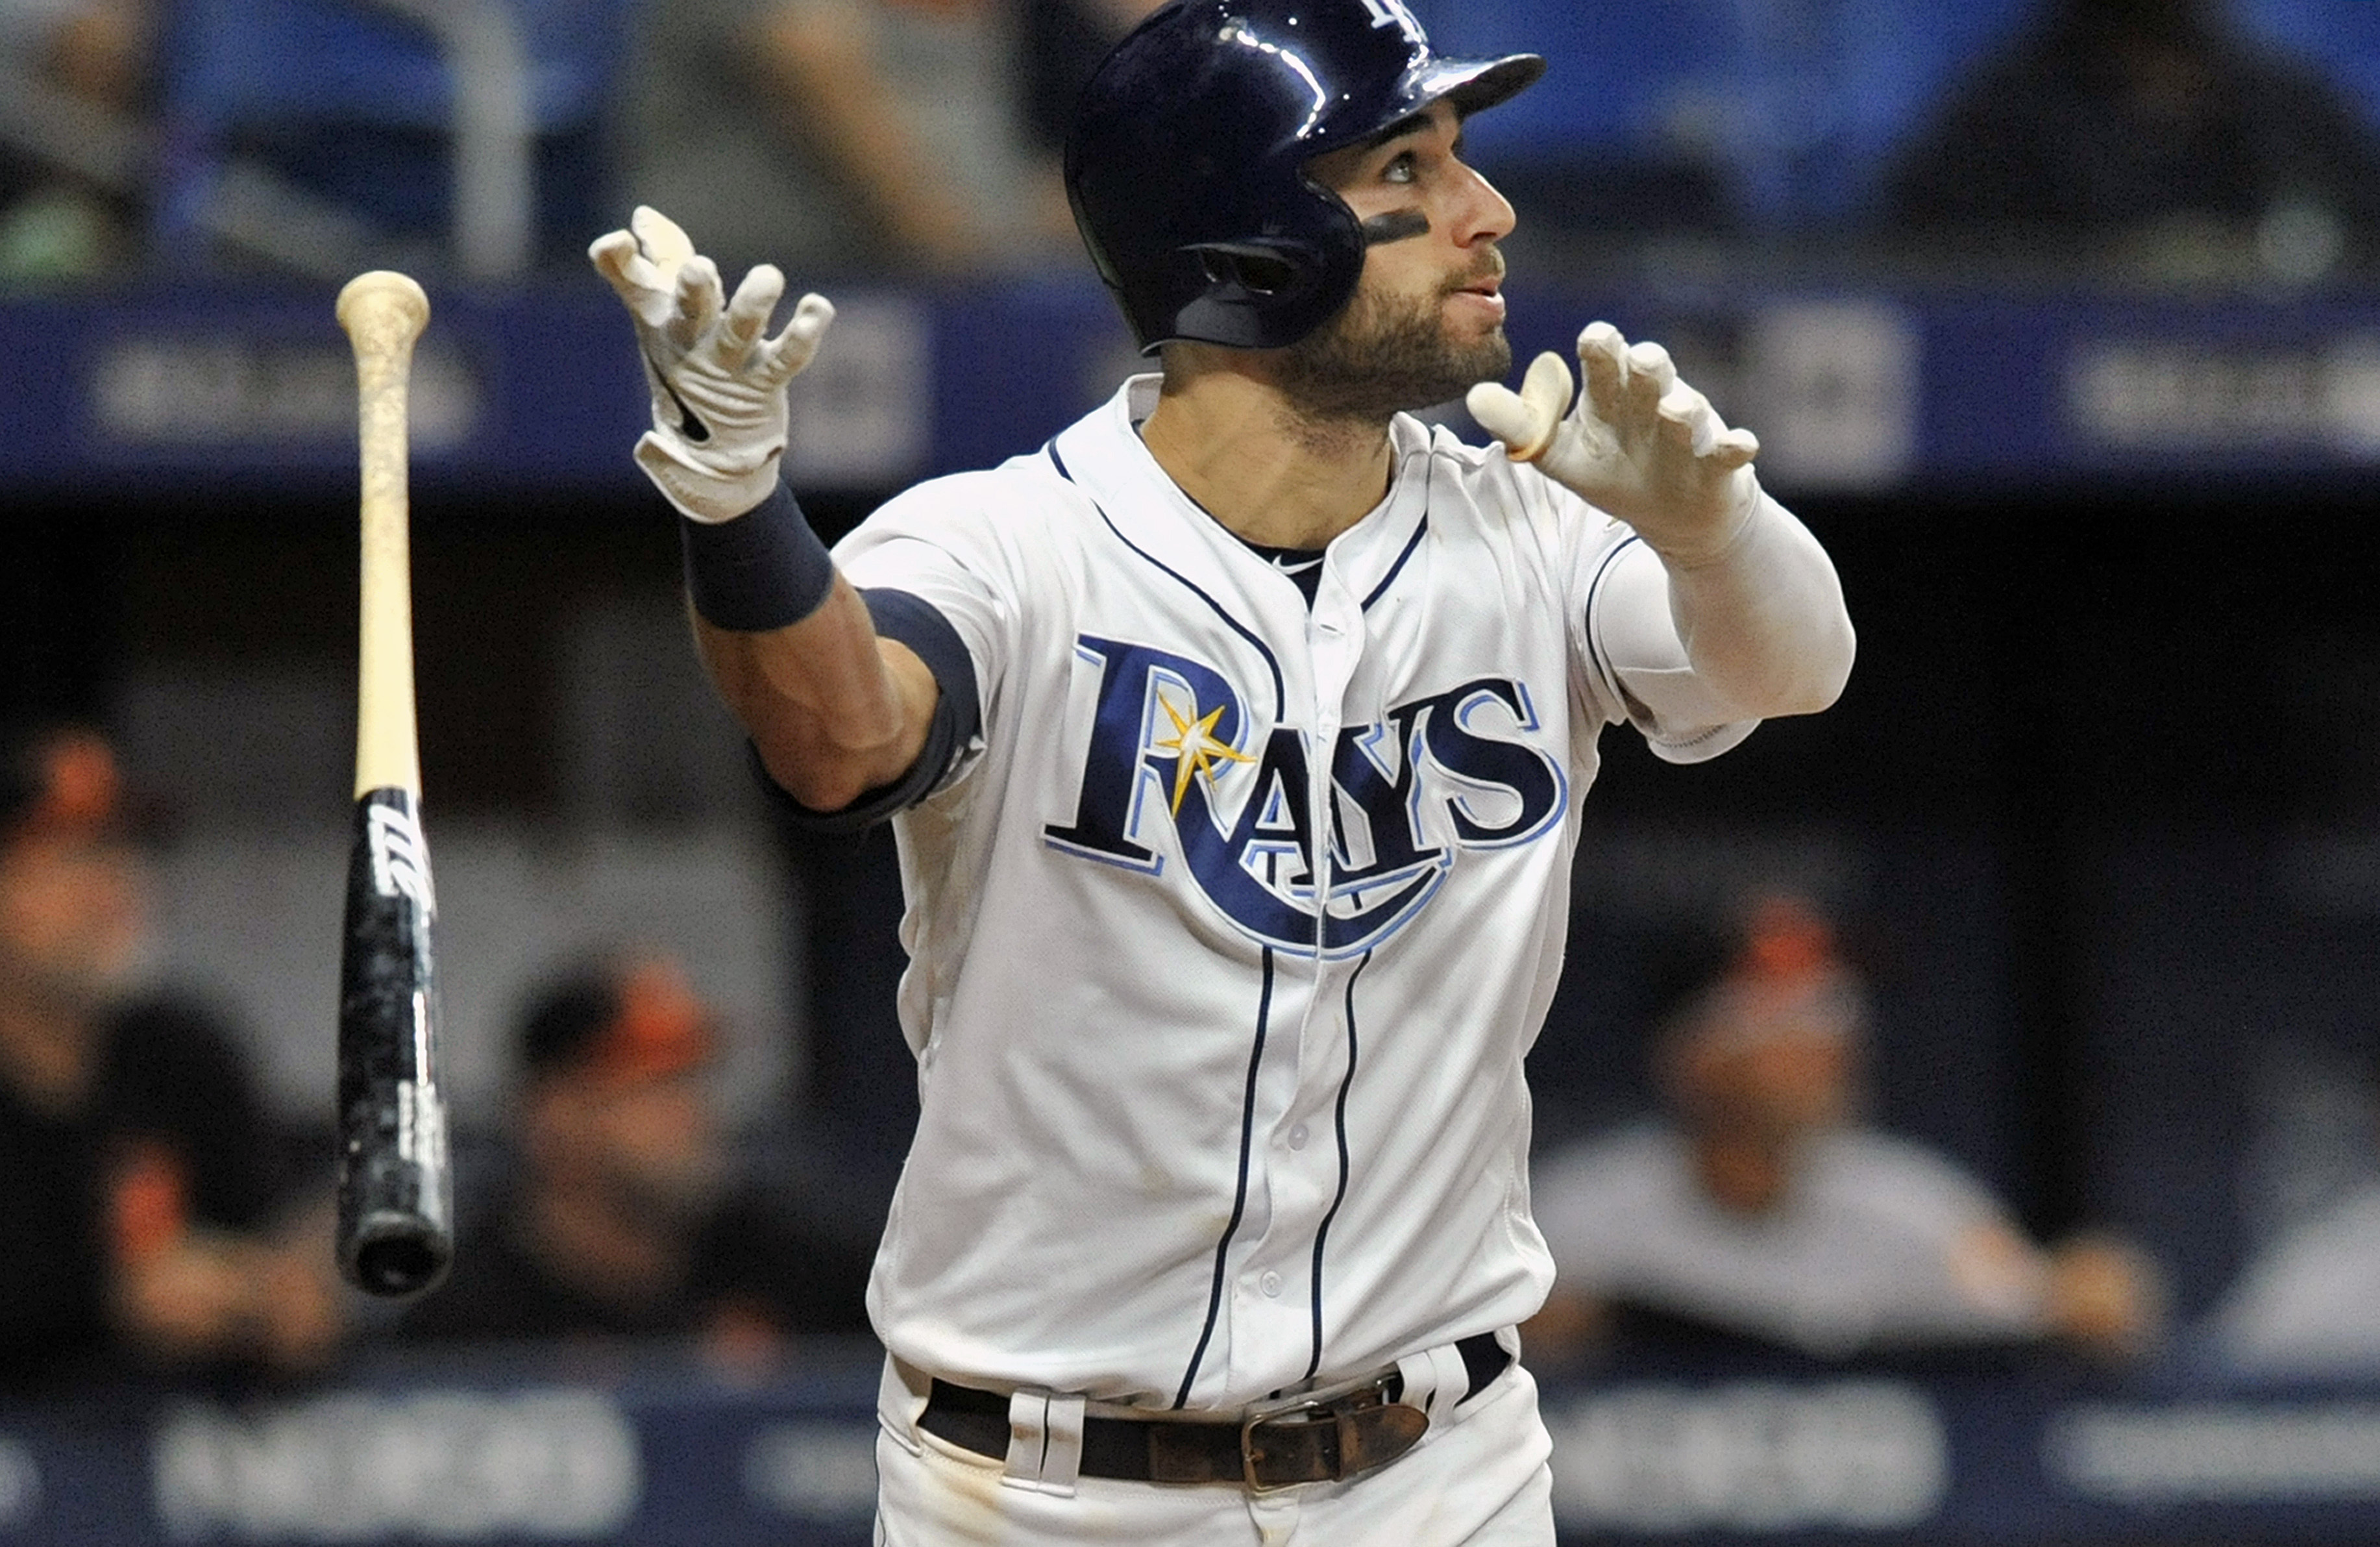 Rays beat Orioles 6-3; McKay goes 0 for 4 in hitting debut